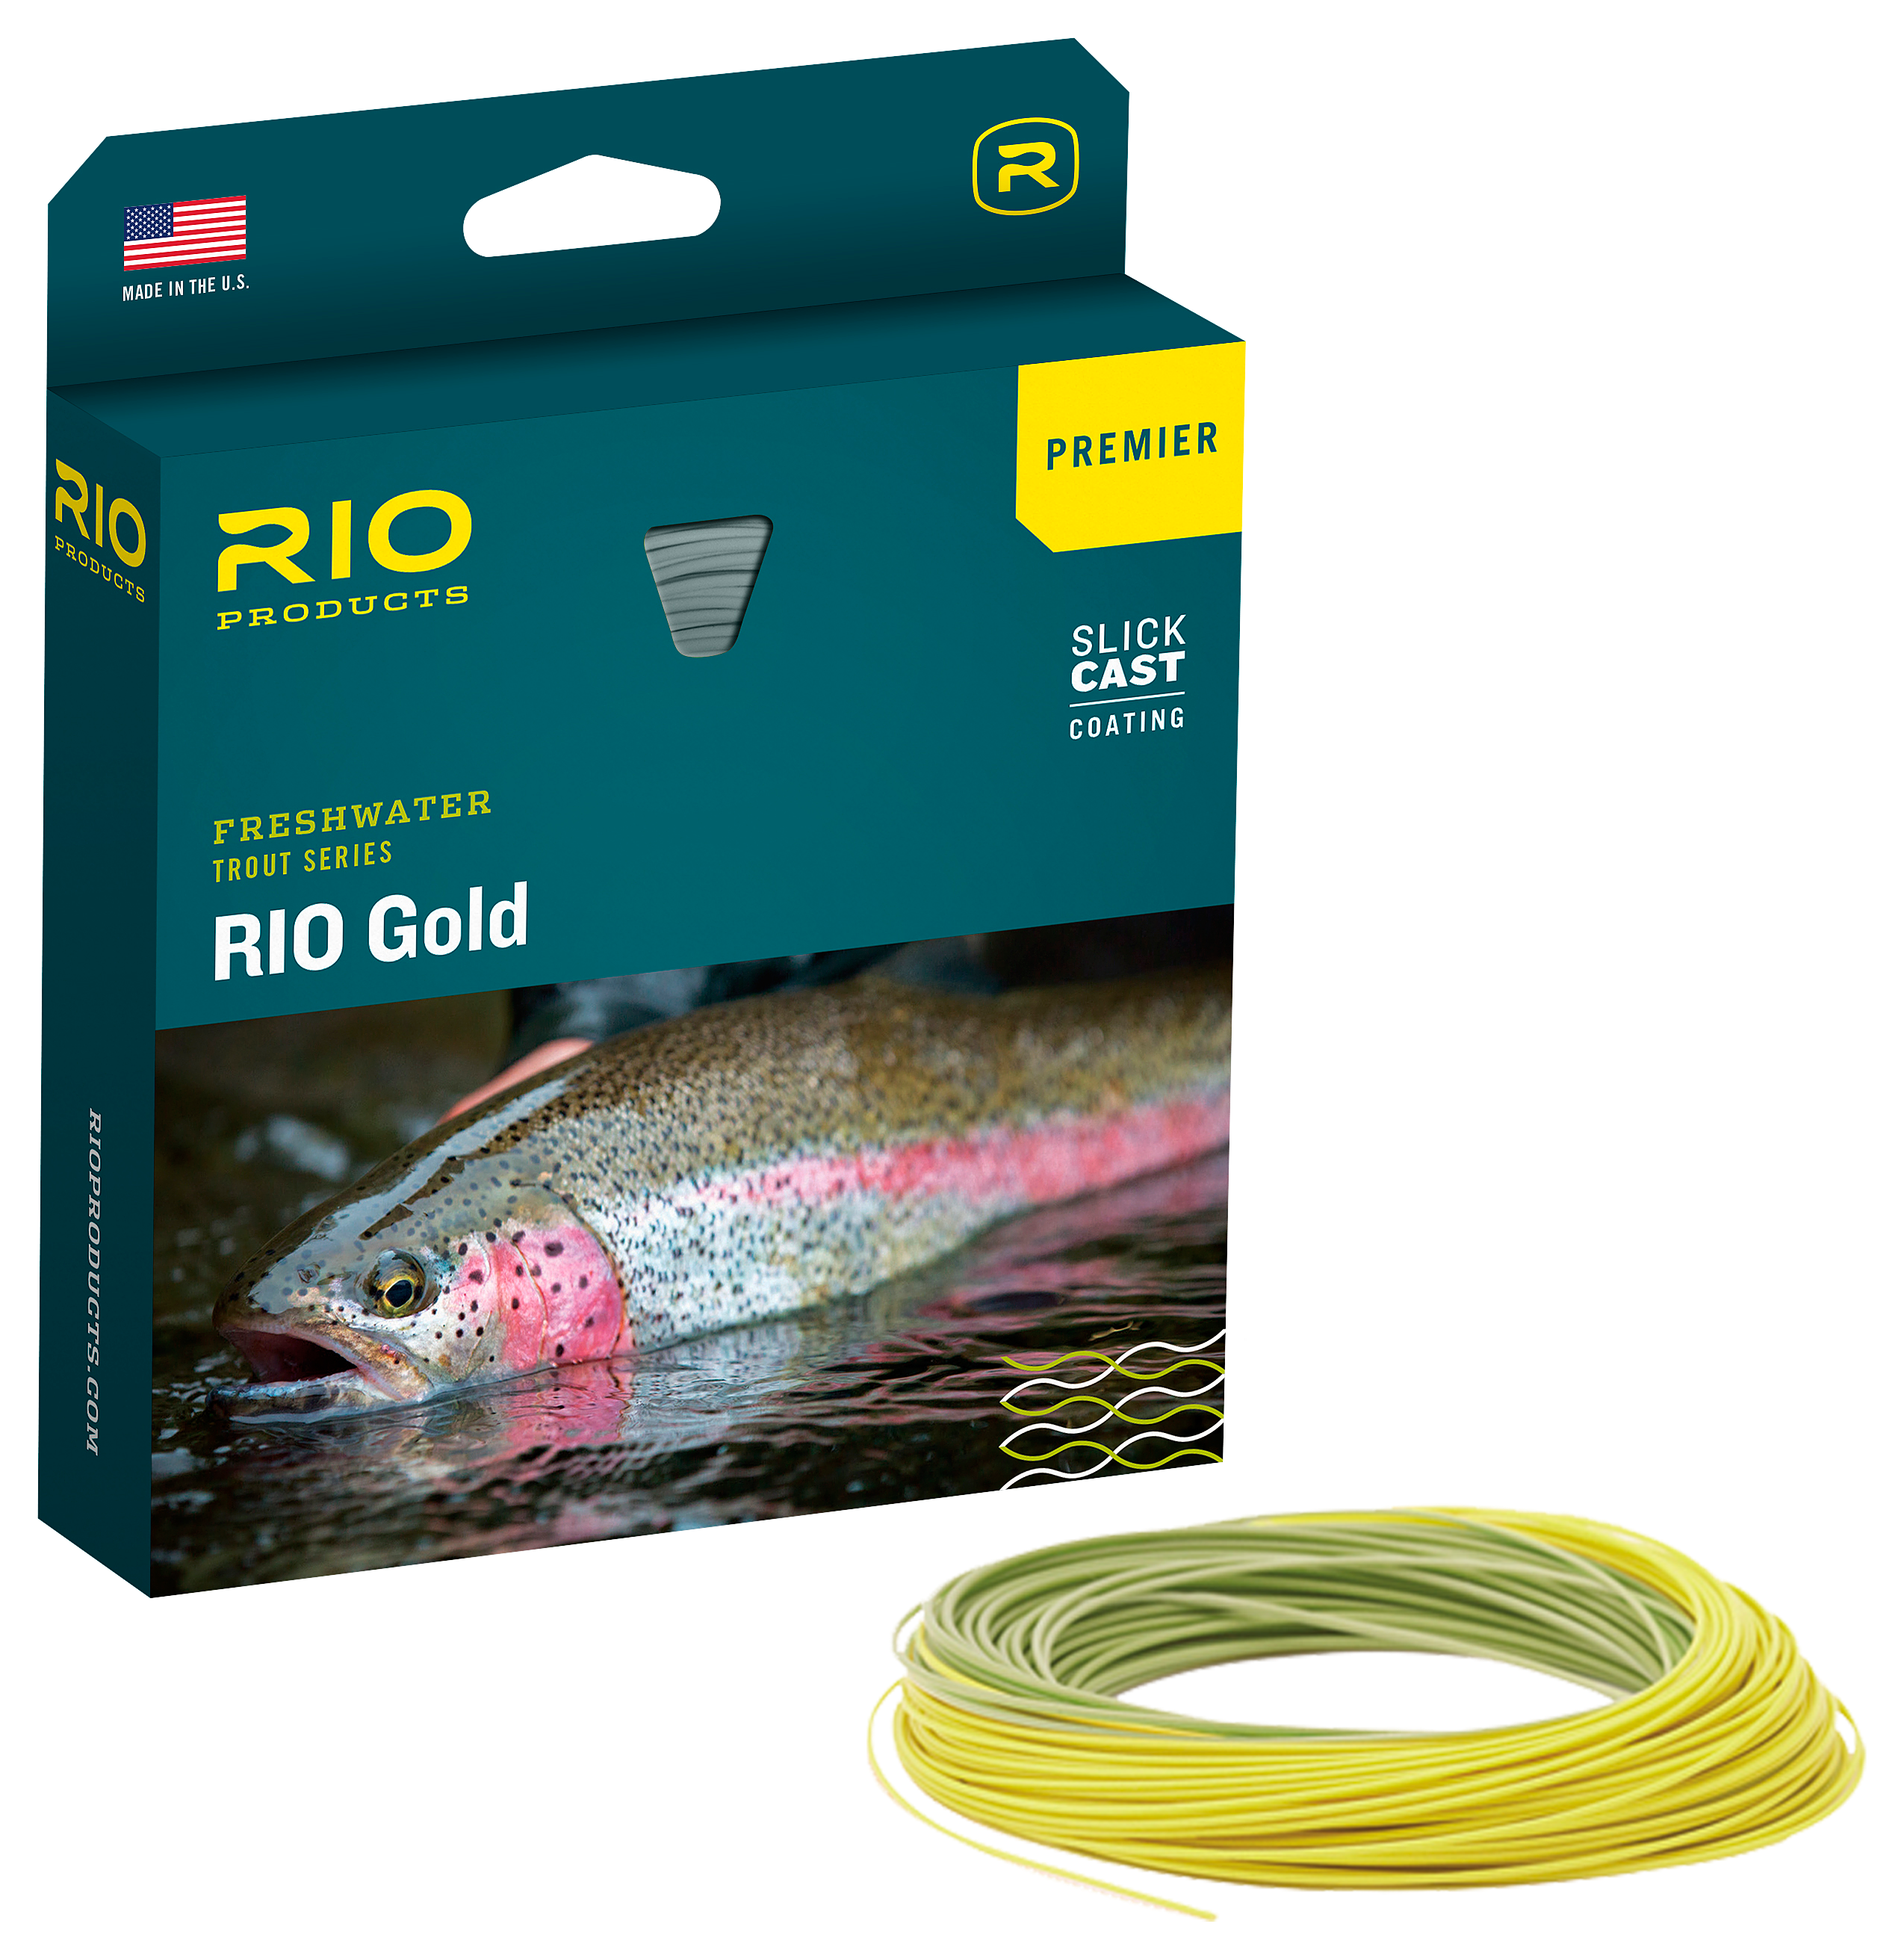 RIO Premier RIO Gold Fly Line - Moss/Gold - 90' - 6 Wt.